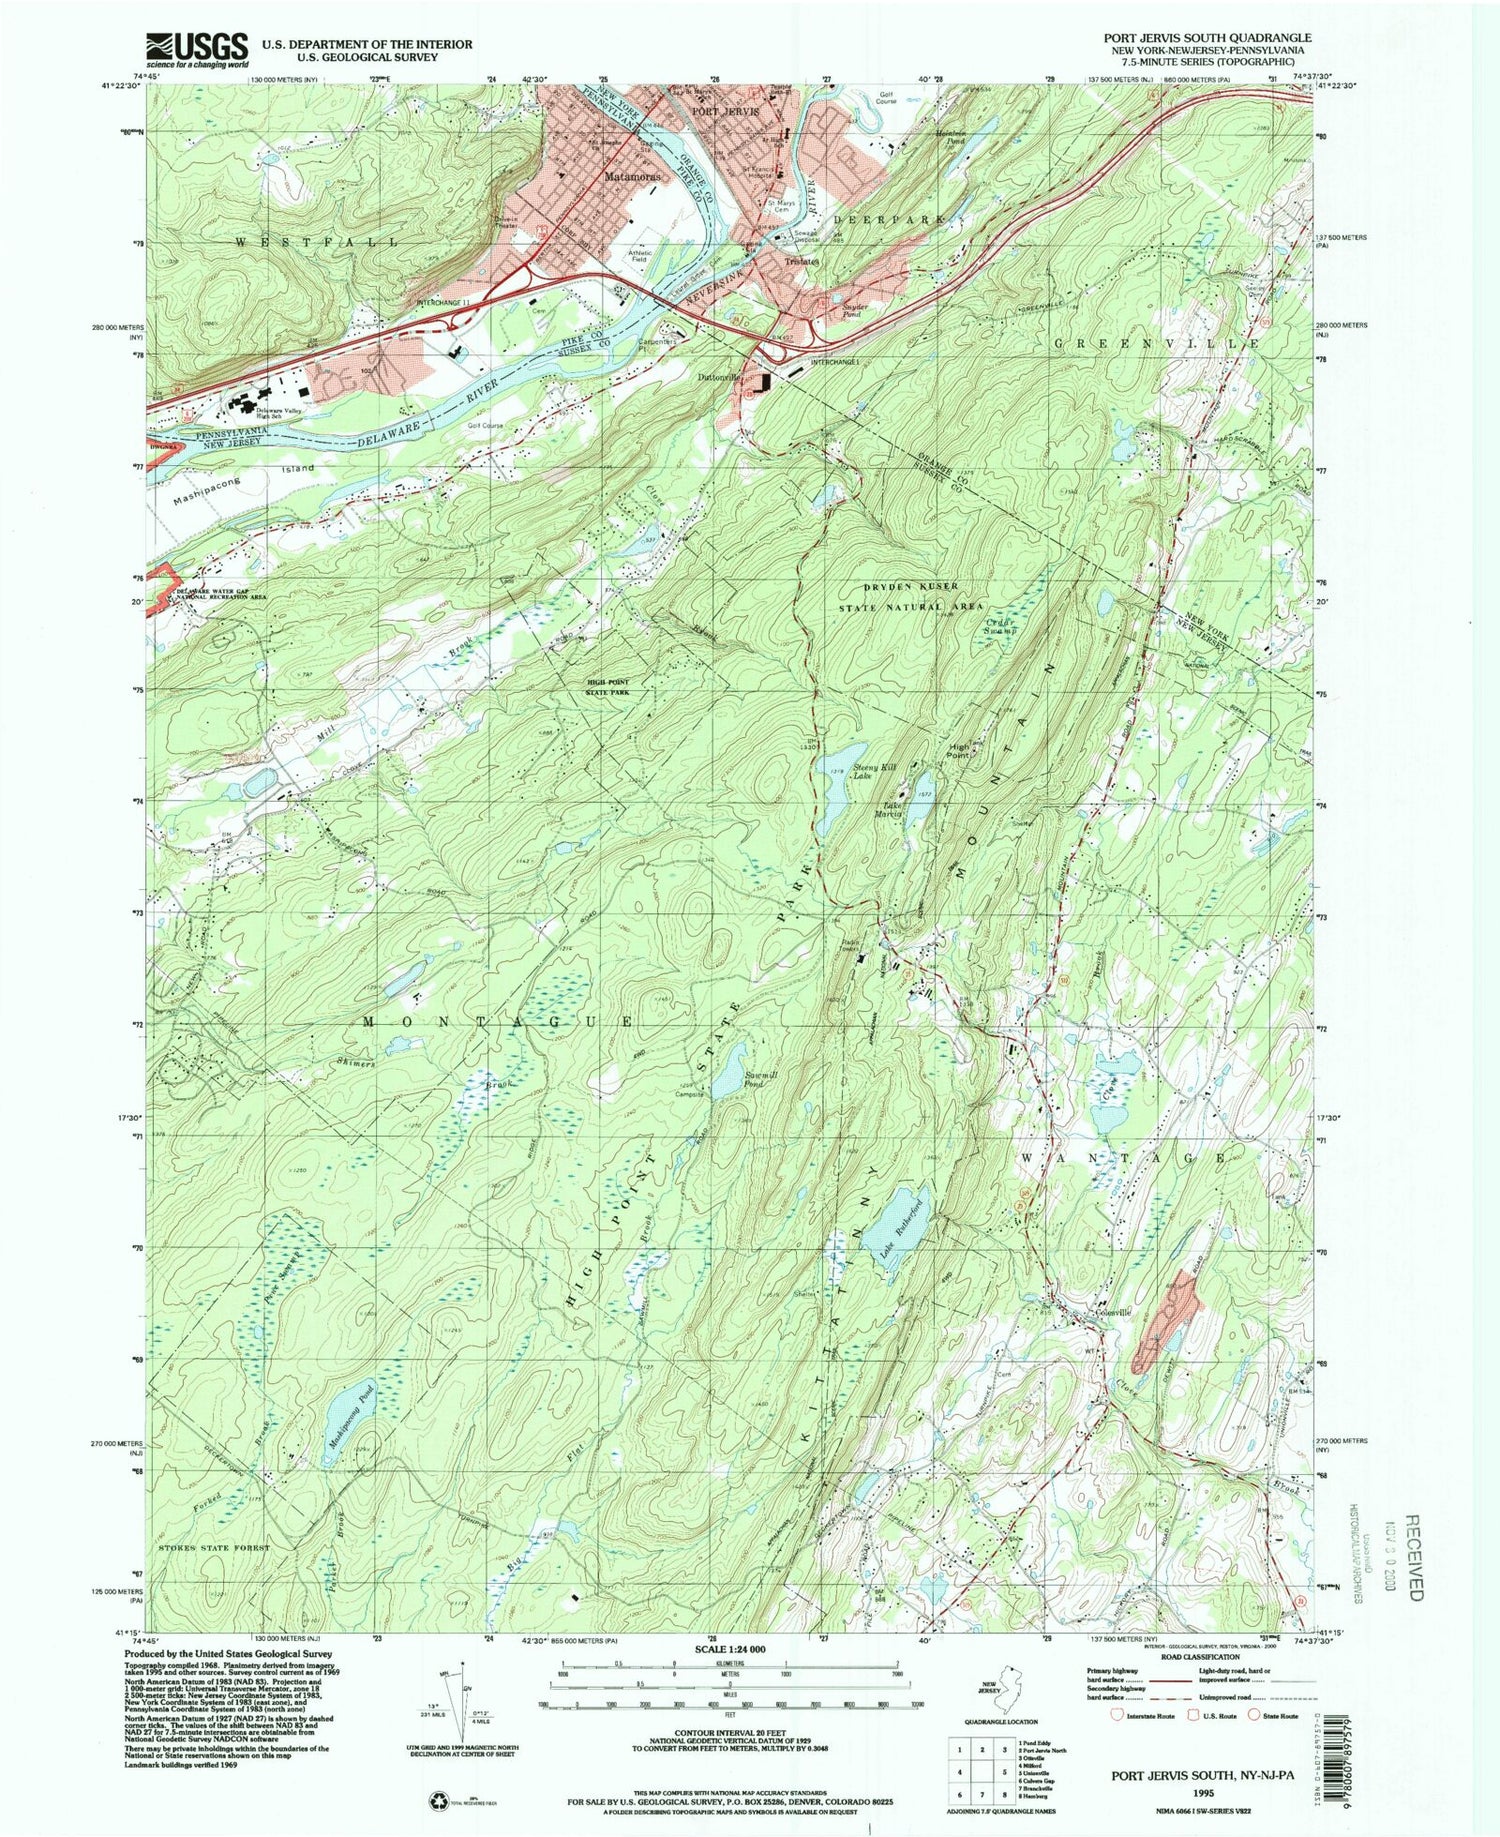 Classic USGS Port Jervis South New York 7.5'x7.5' Topo Map Image